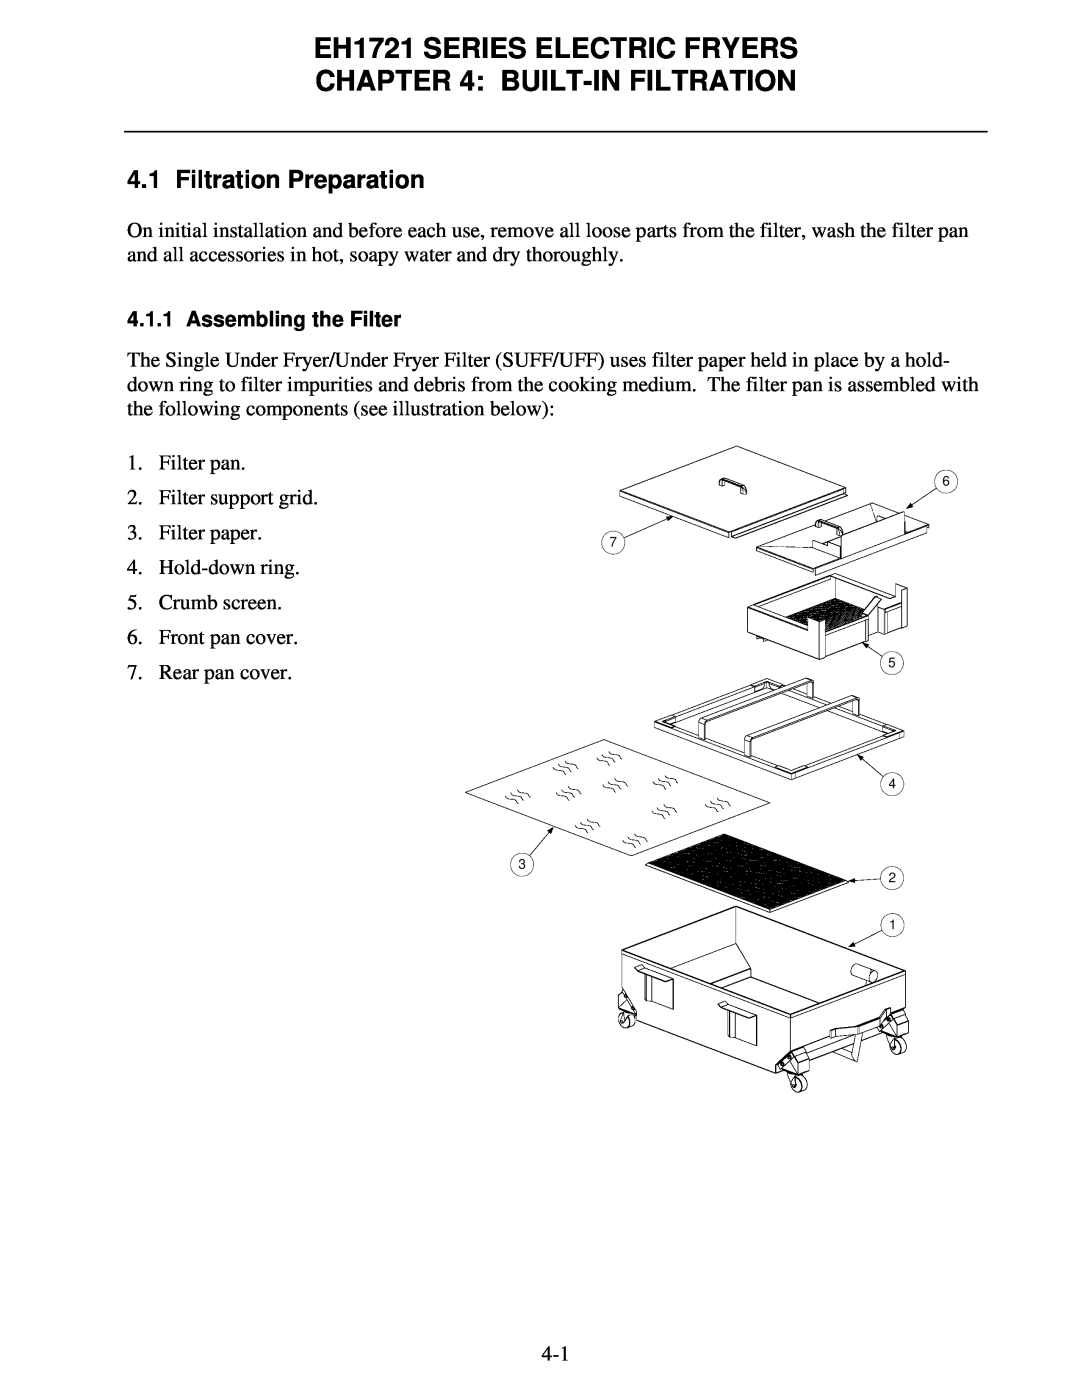 Frymaster operation manual Built-Infiltration, Filtration Preparation, EH1721 SERIES ELECTRIC FRYERS 